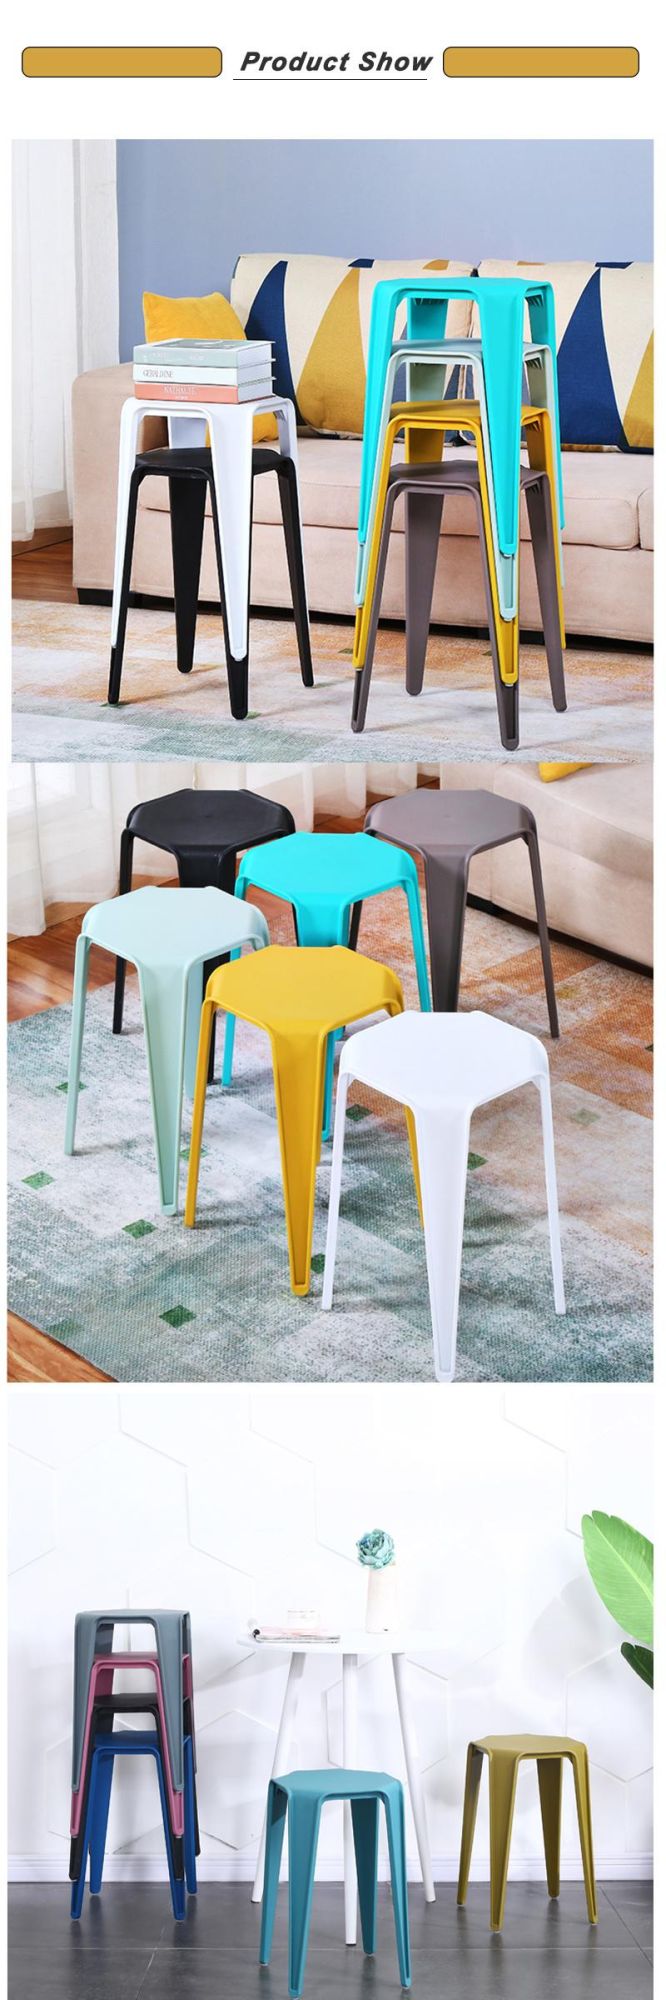 Simple Design Home Outdoor in Door Kitchen Room Furniture Colorful Stacking Plastic Stool Chair for Garden